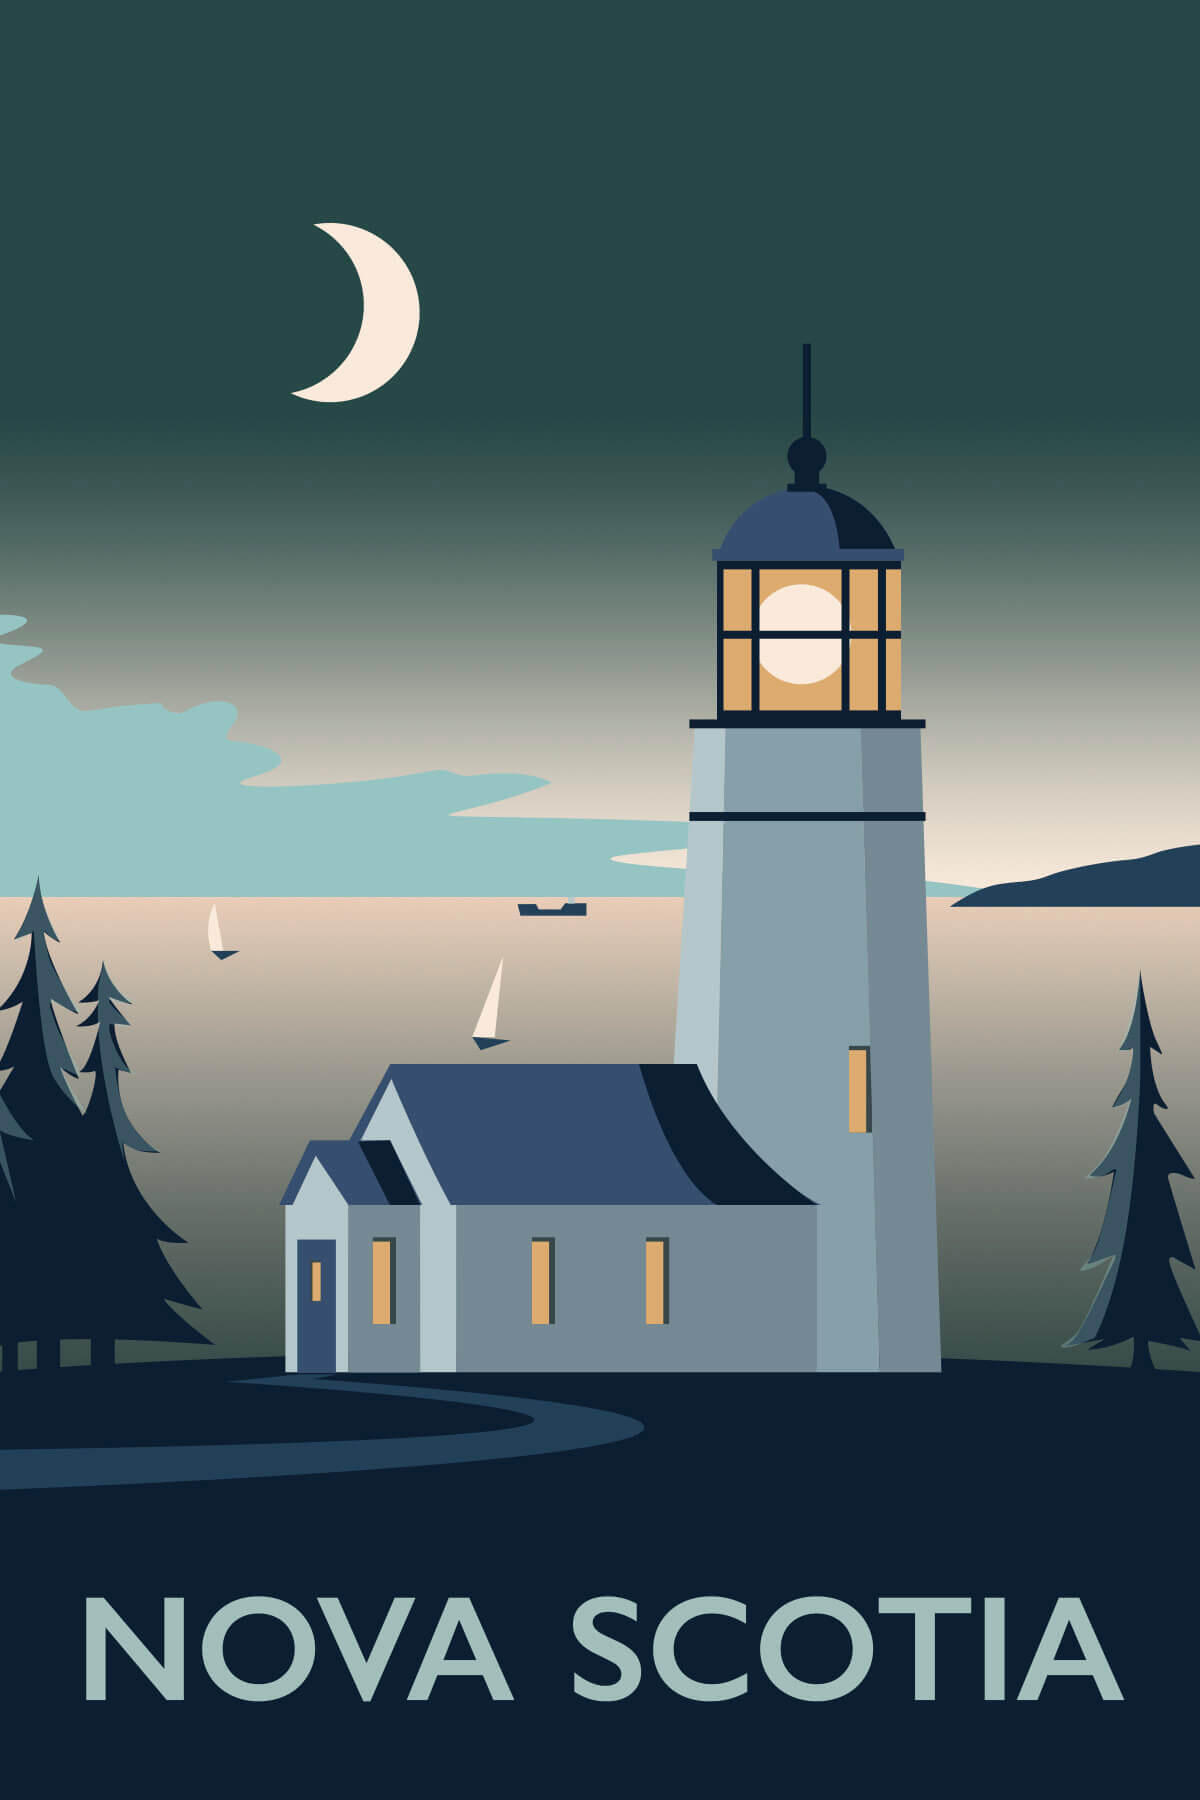 Travel poster for Nova Scotia featuring the lighthouse.